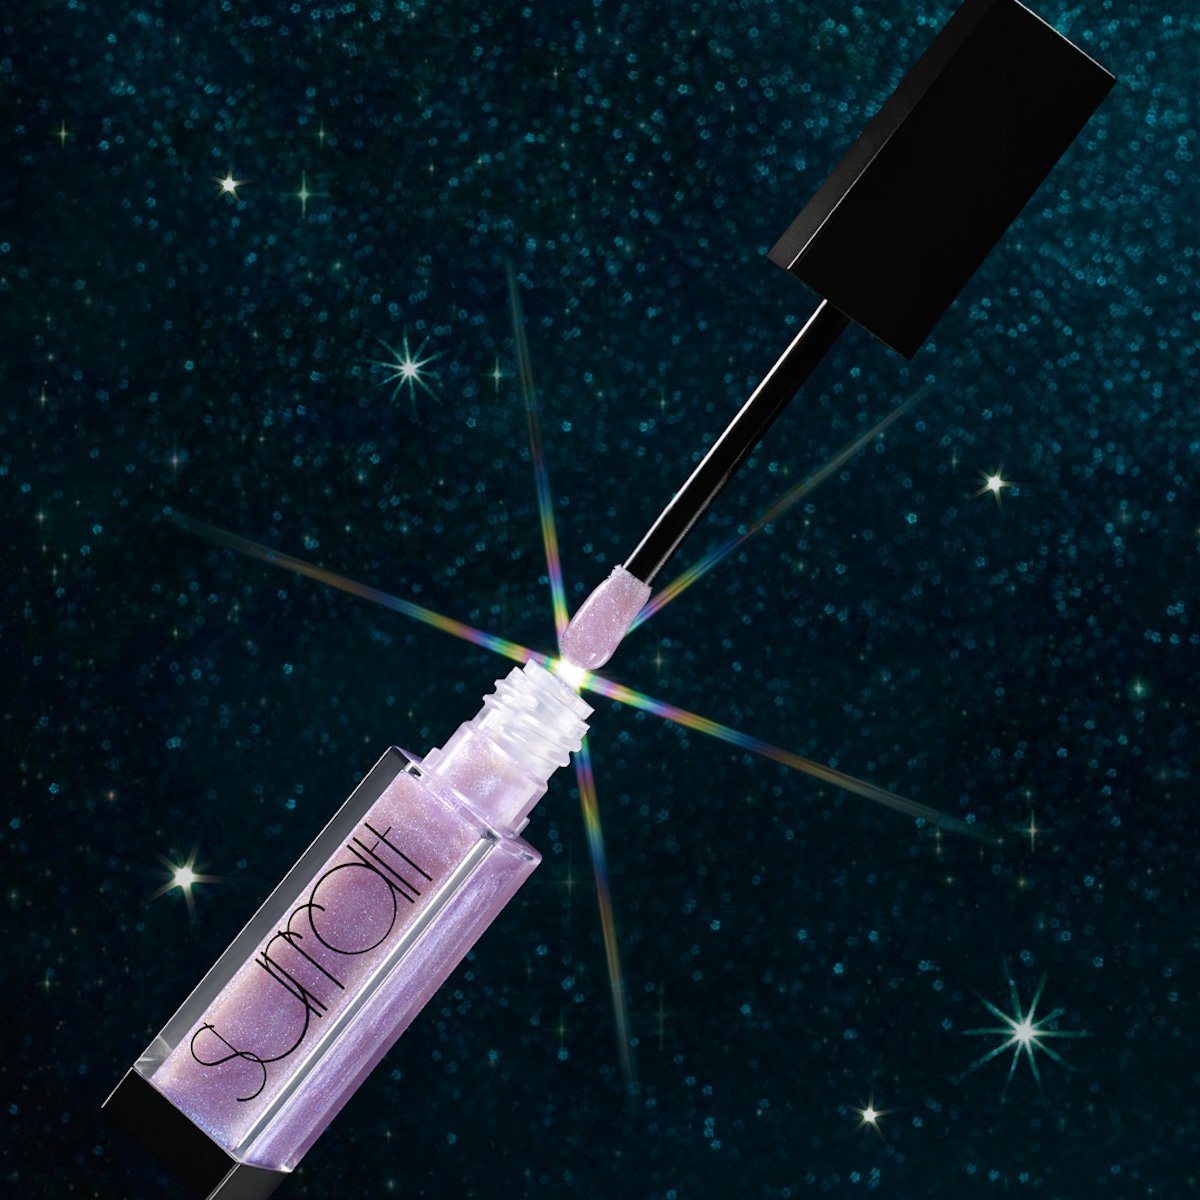 AMETHYSTE - IRIDESCENT SHEER VIOLET WITH DUOCHROME SHIMMER - high shine lip gloss in iridescent sheer violet shade 